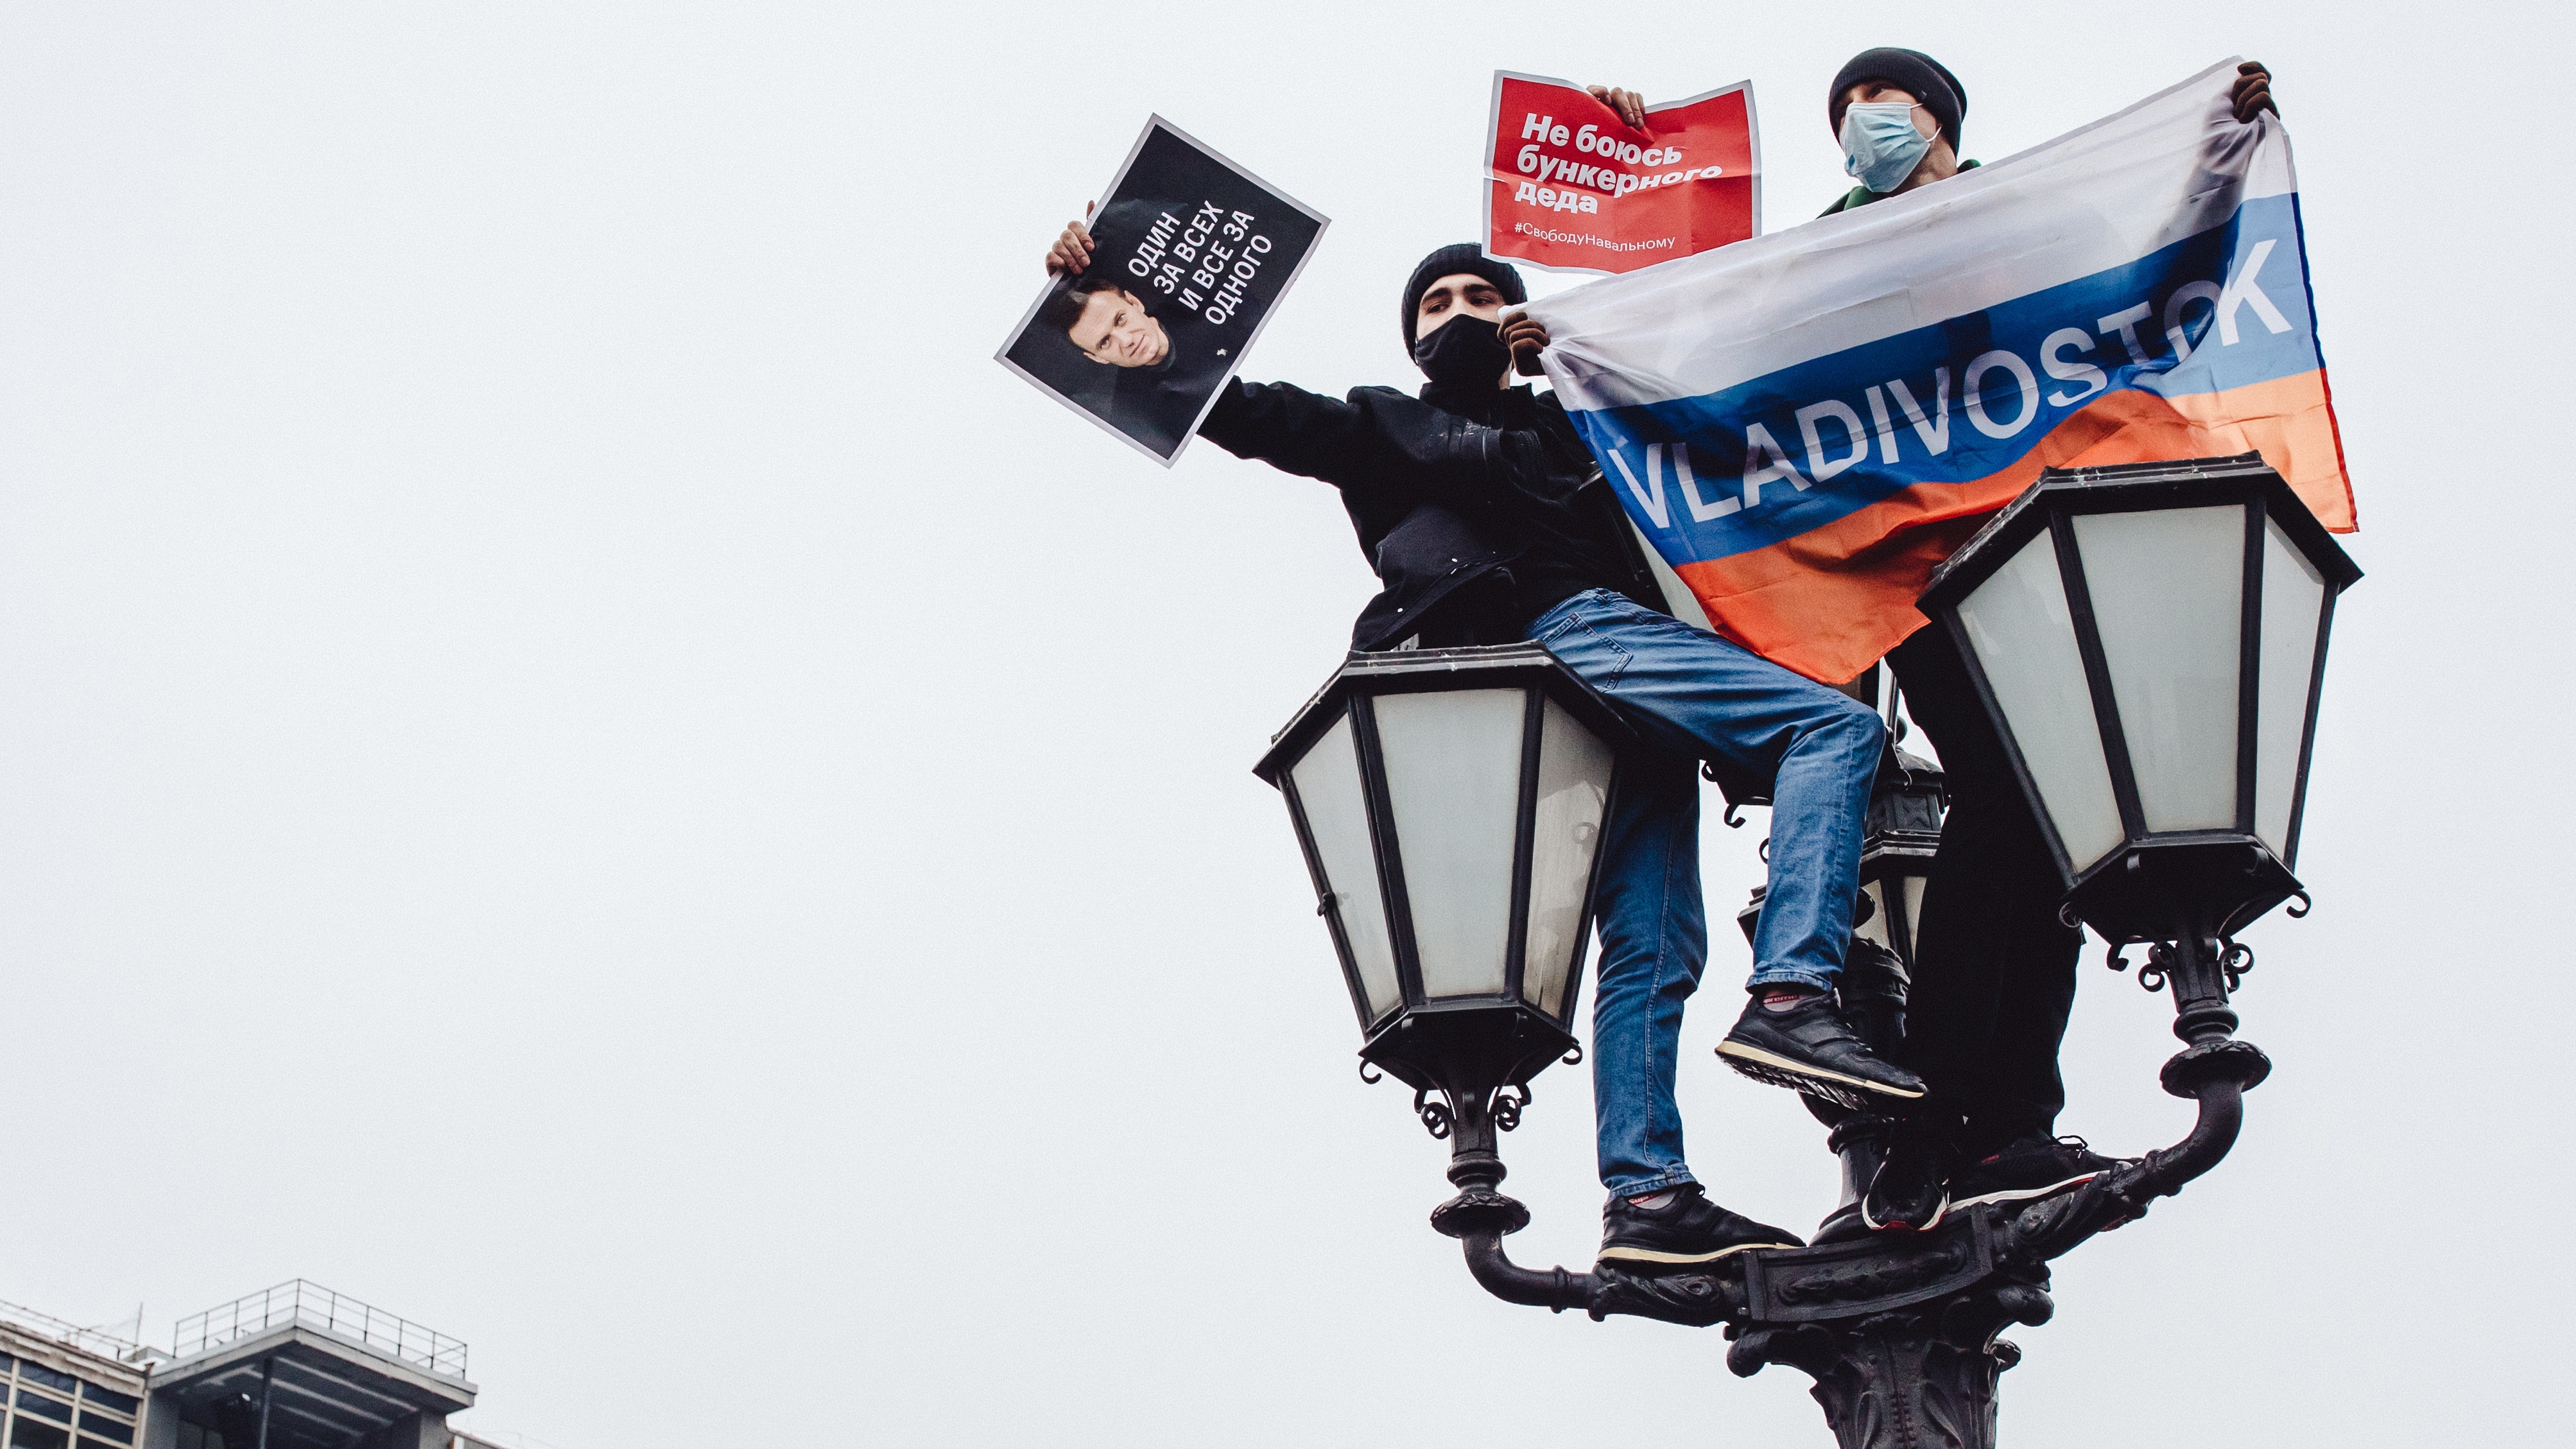 Pro-Navalny protestors during a demonstration in Moscow